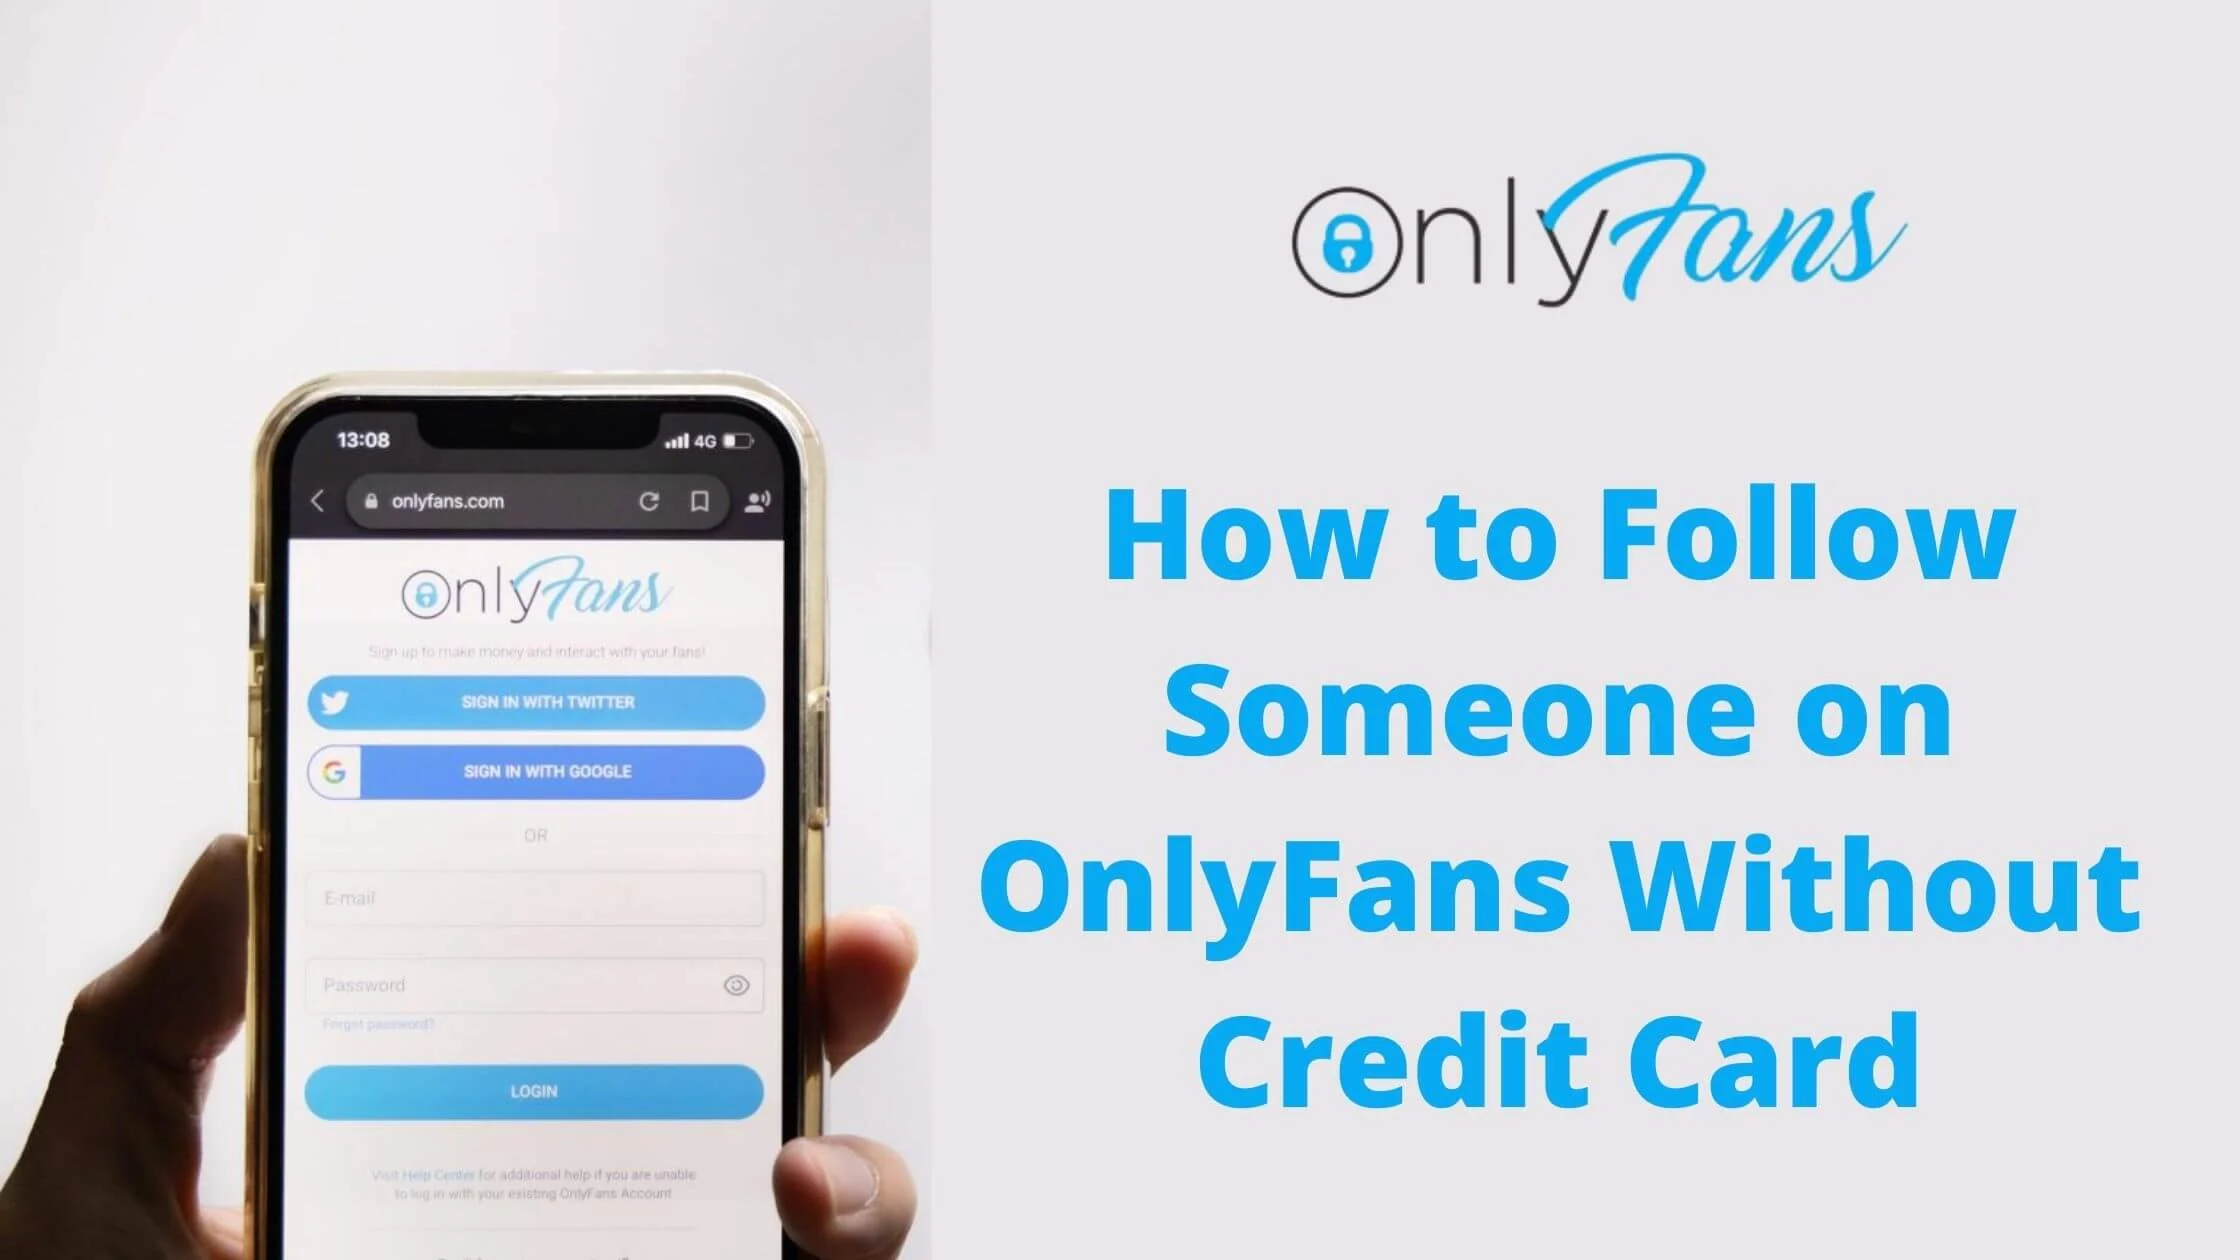 How to search for someone on only fans